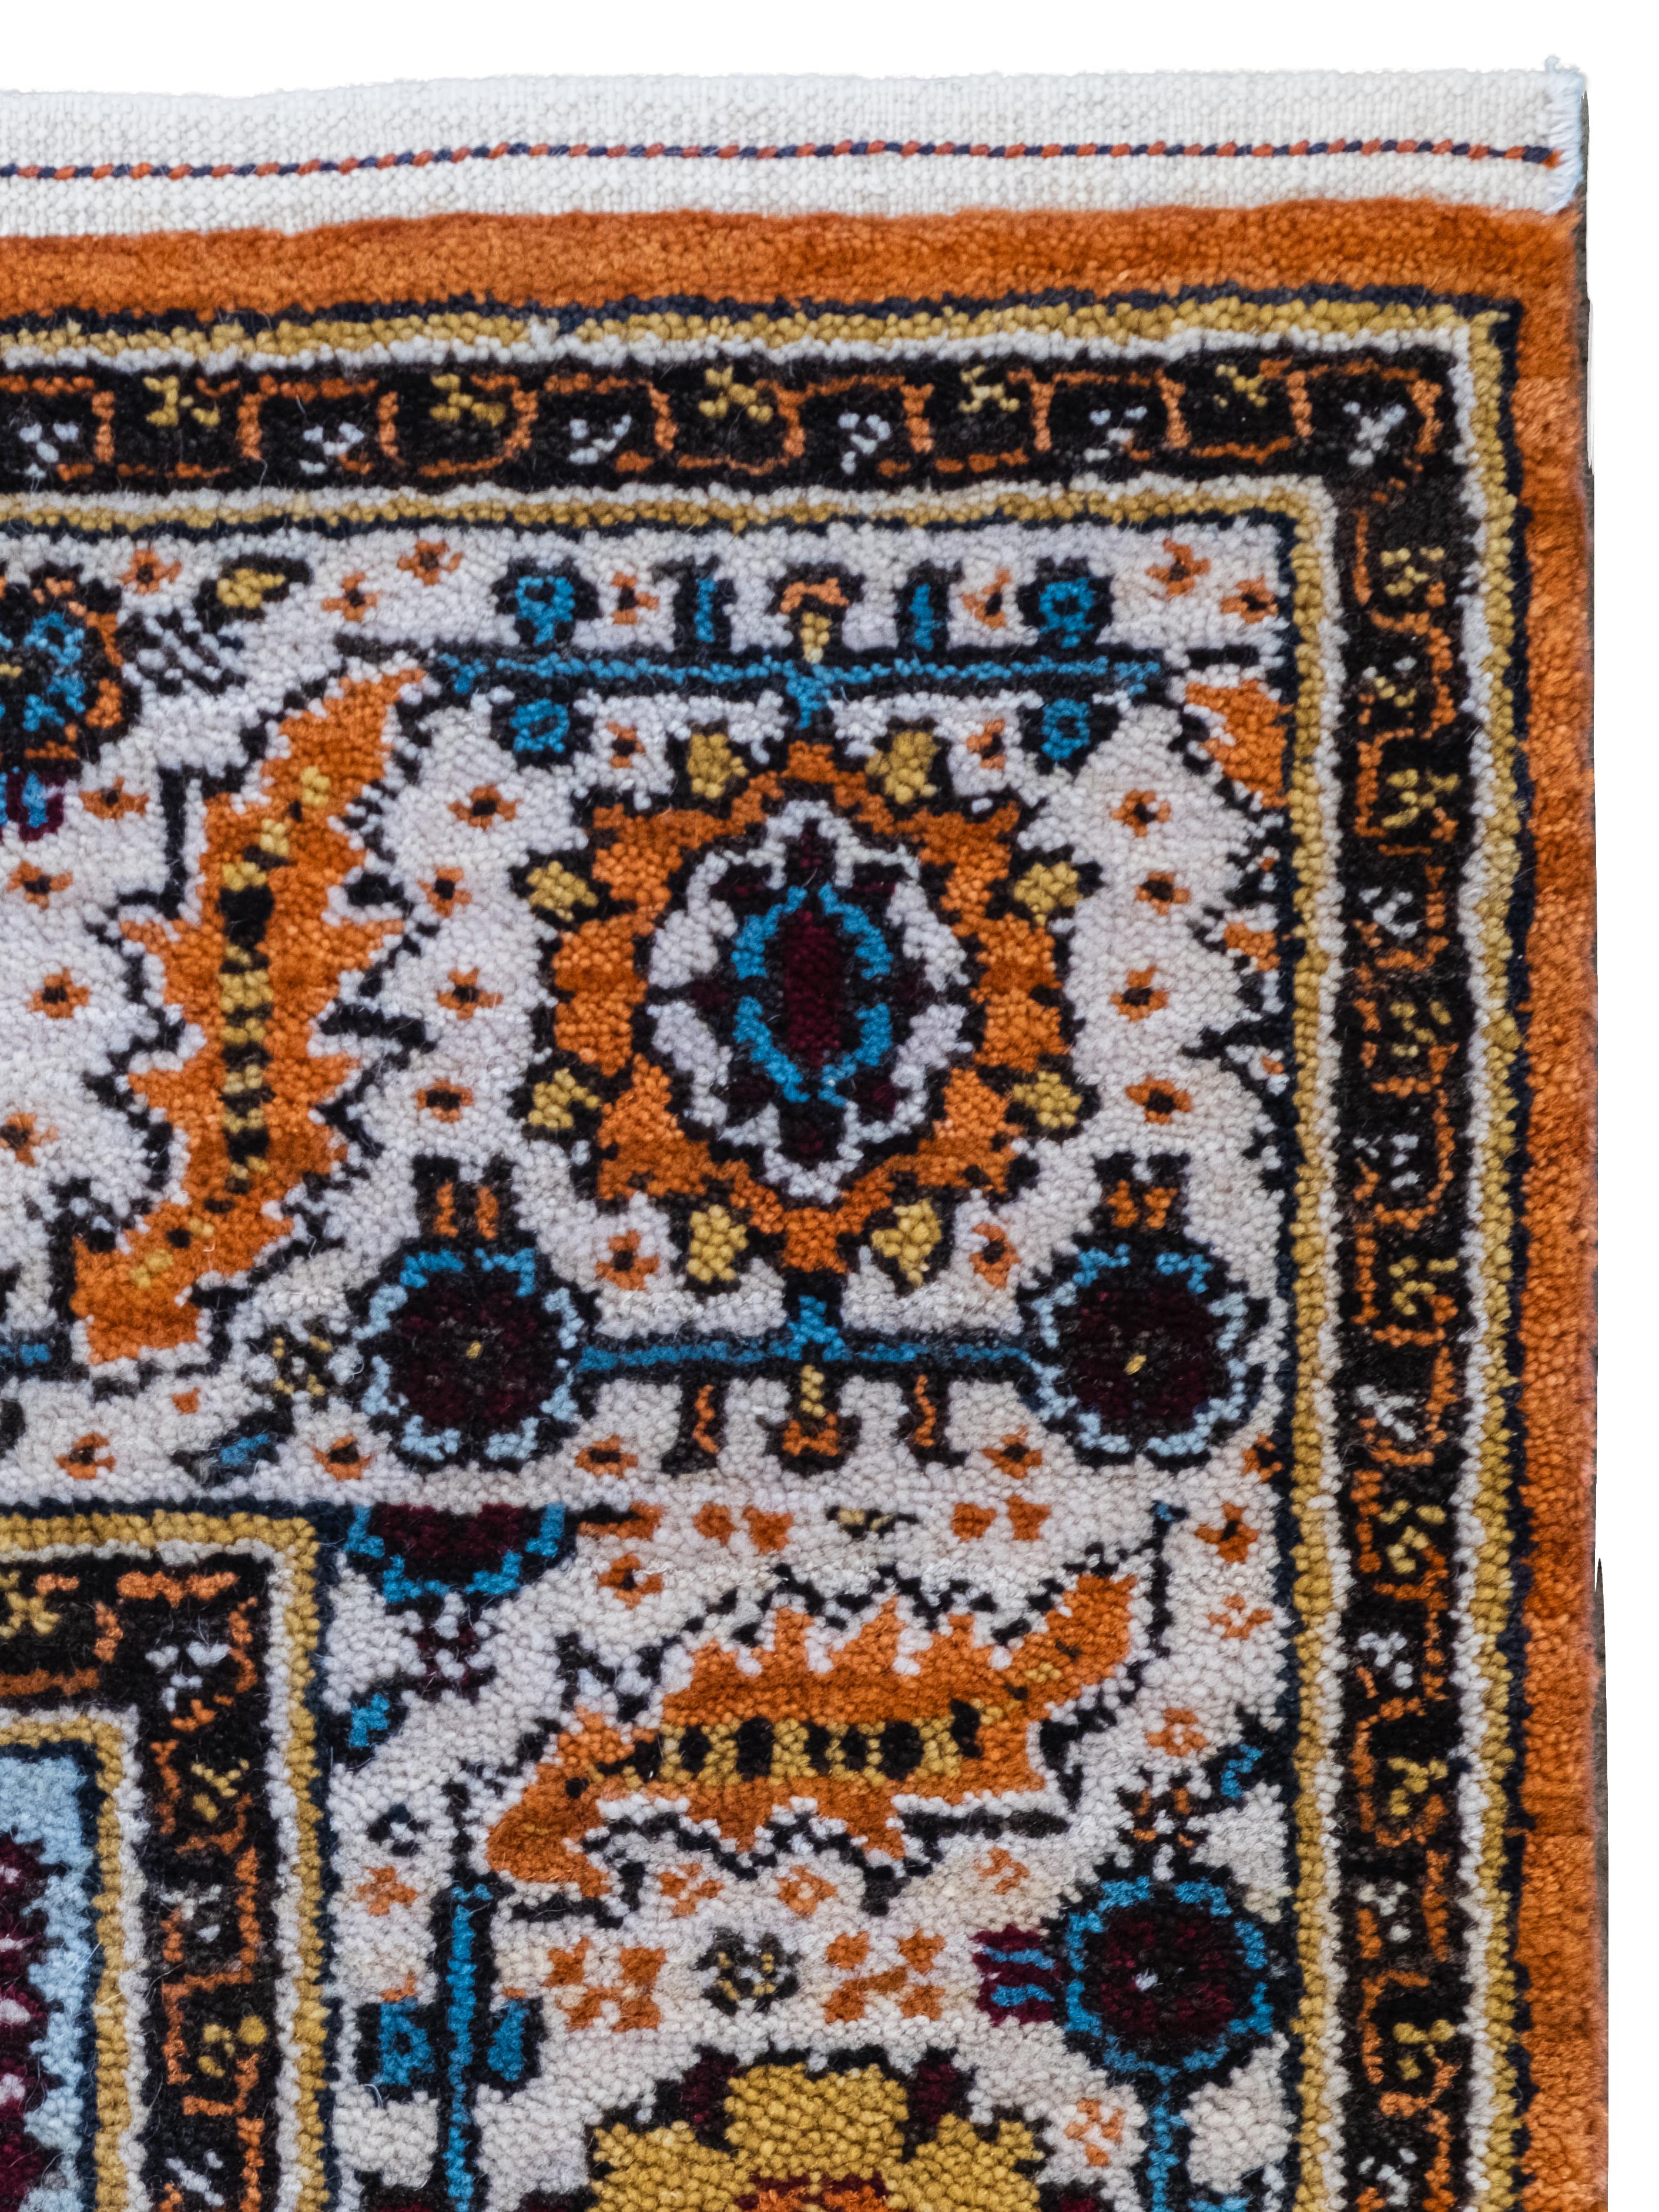 Contemporary Transitional Orange, Blue, and Cream Persian Area Rug in Pure Wool, 5' x 7' For Sale